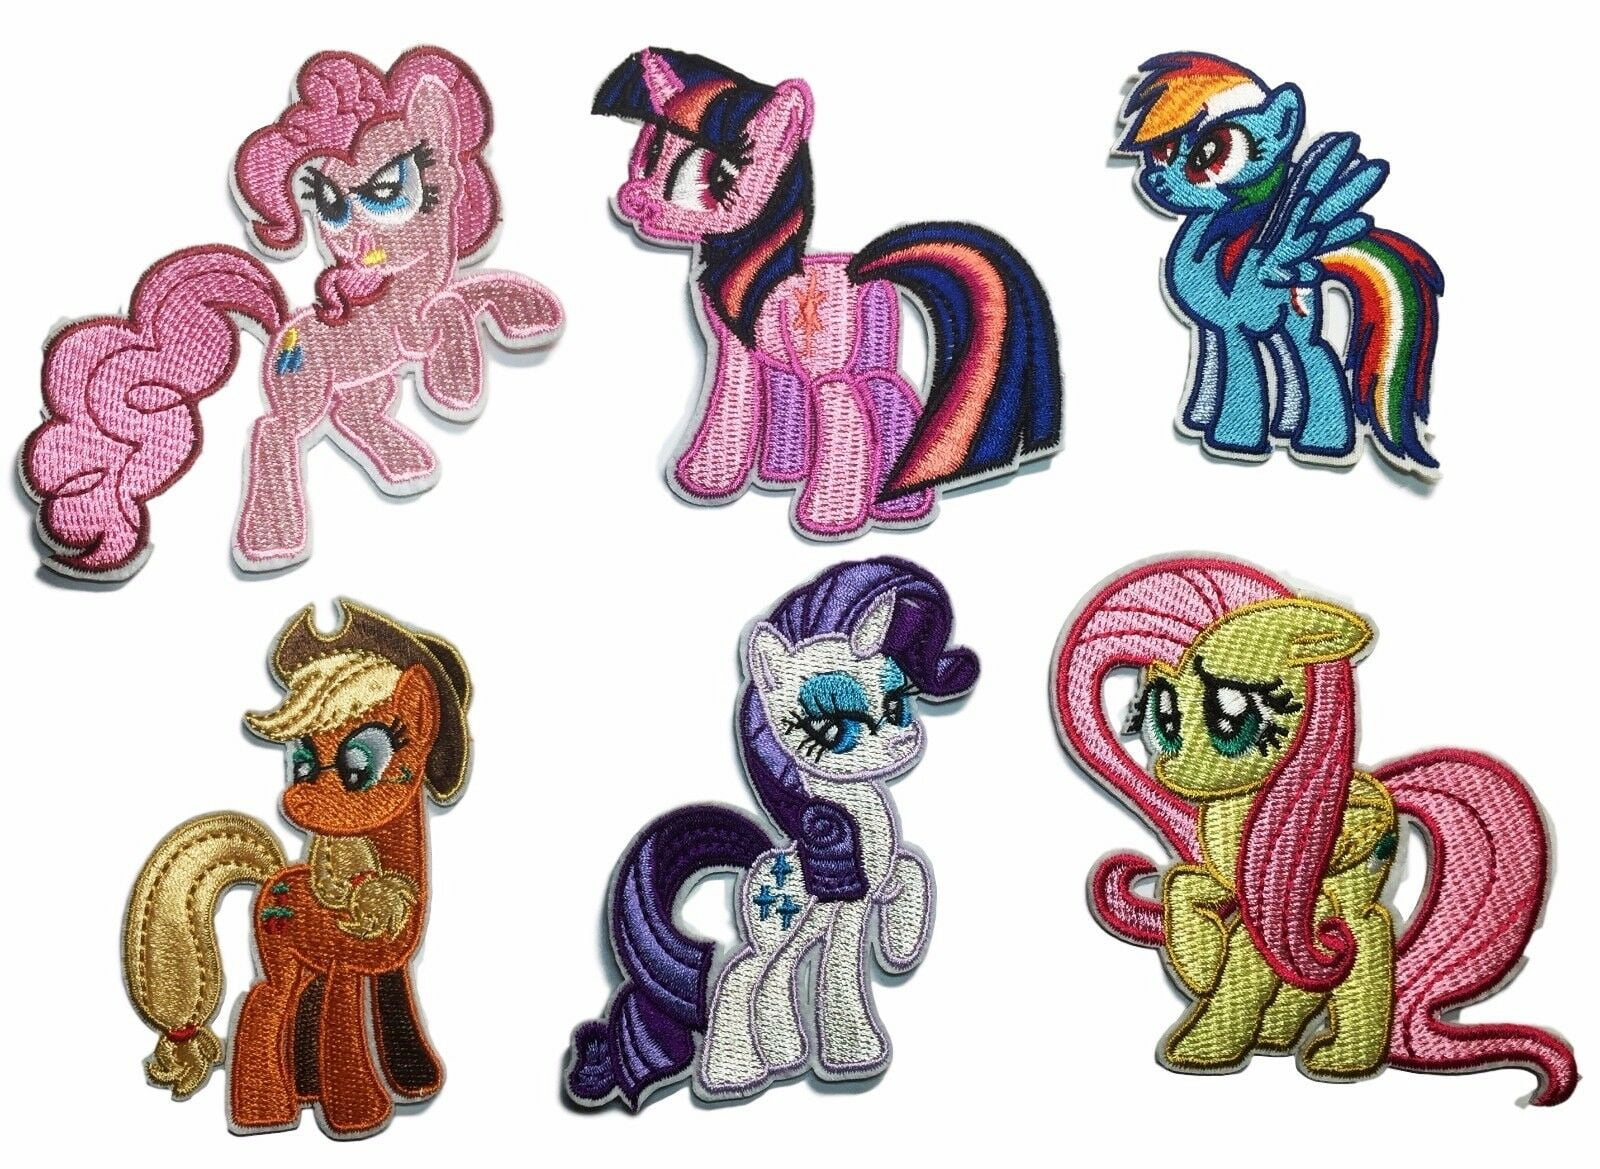 My Little Pony Dash & Friends Ponies Embroidered Iron On Patch Set of 6 Patches 